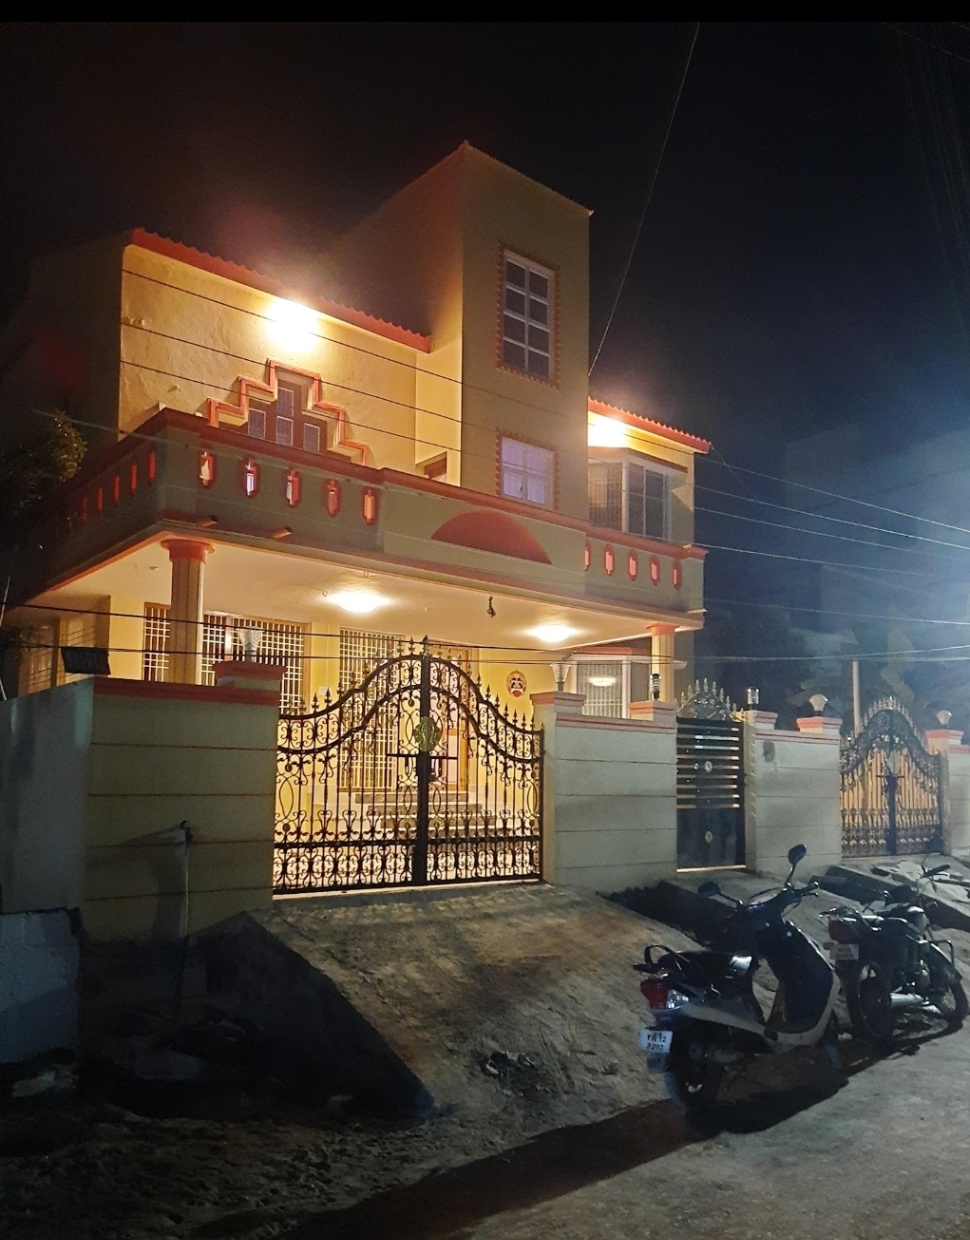 2 Bed/ 2 Bath House/ Bungalow/ Villa; 1,040 sq. ft. carpet area, Semi Furnished for rent @Iyyapanthangal,  behind depo